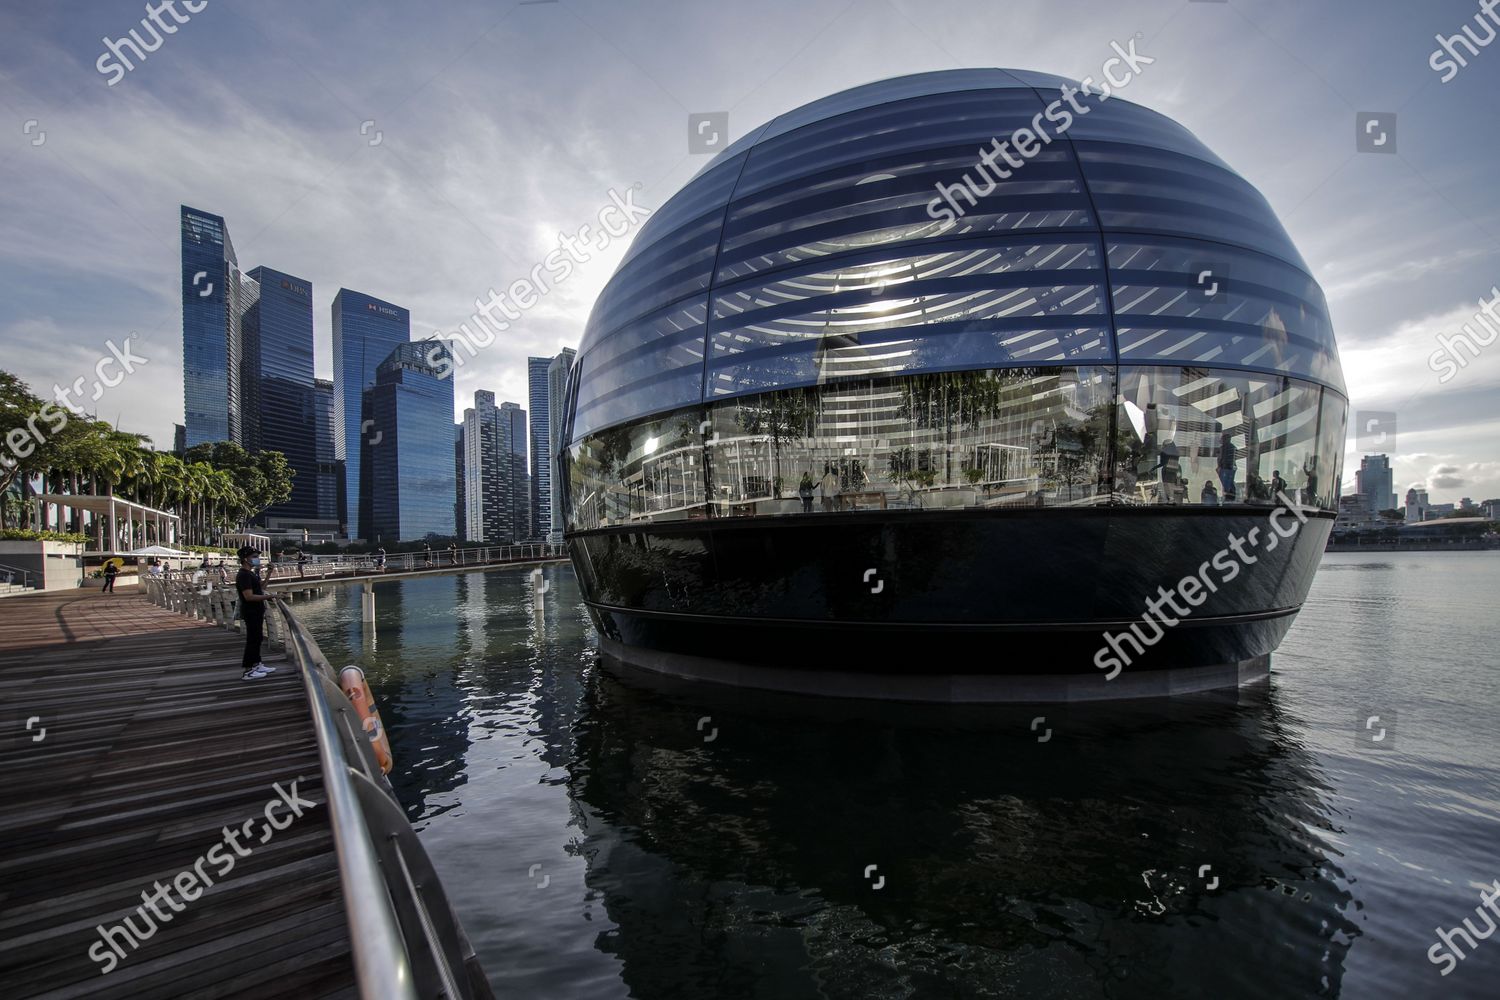 Floating' Apple store to open on Sept 10 at Marina Bay Sands - TODAY